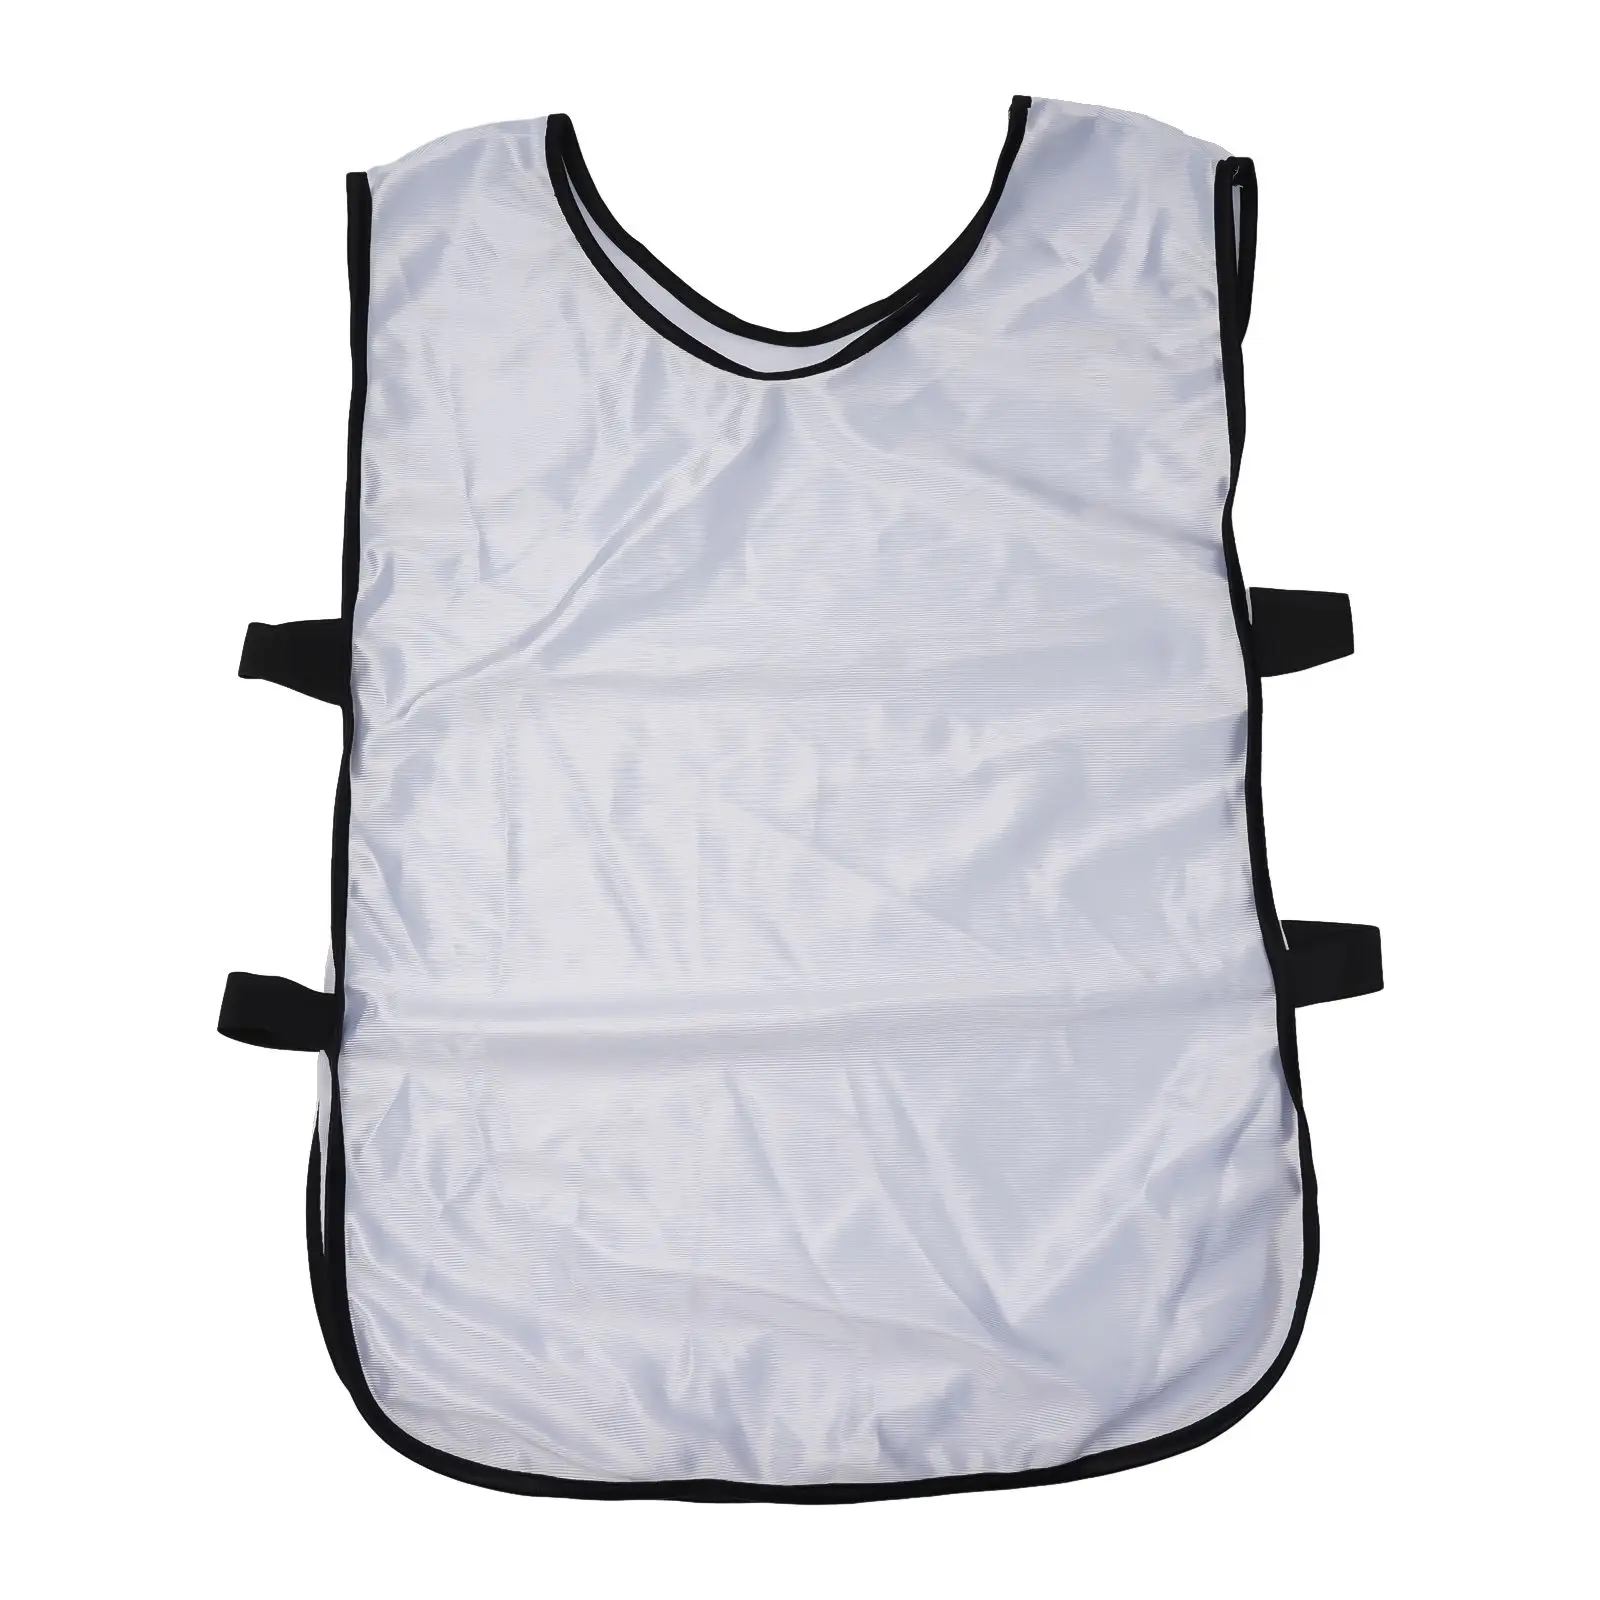 

Football Vest 12 Color Fast Drying Lightweight Mesh Polyester Soccer Training Breathable Jerseys Loose Fitment